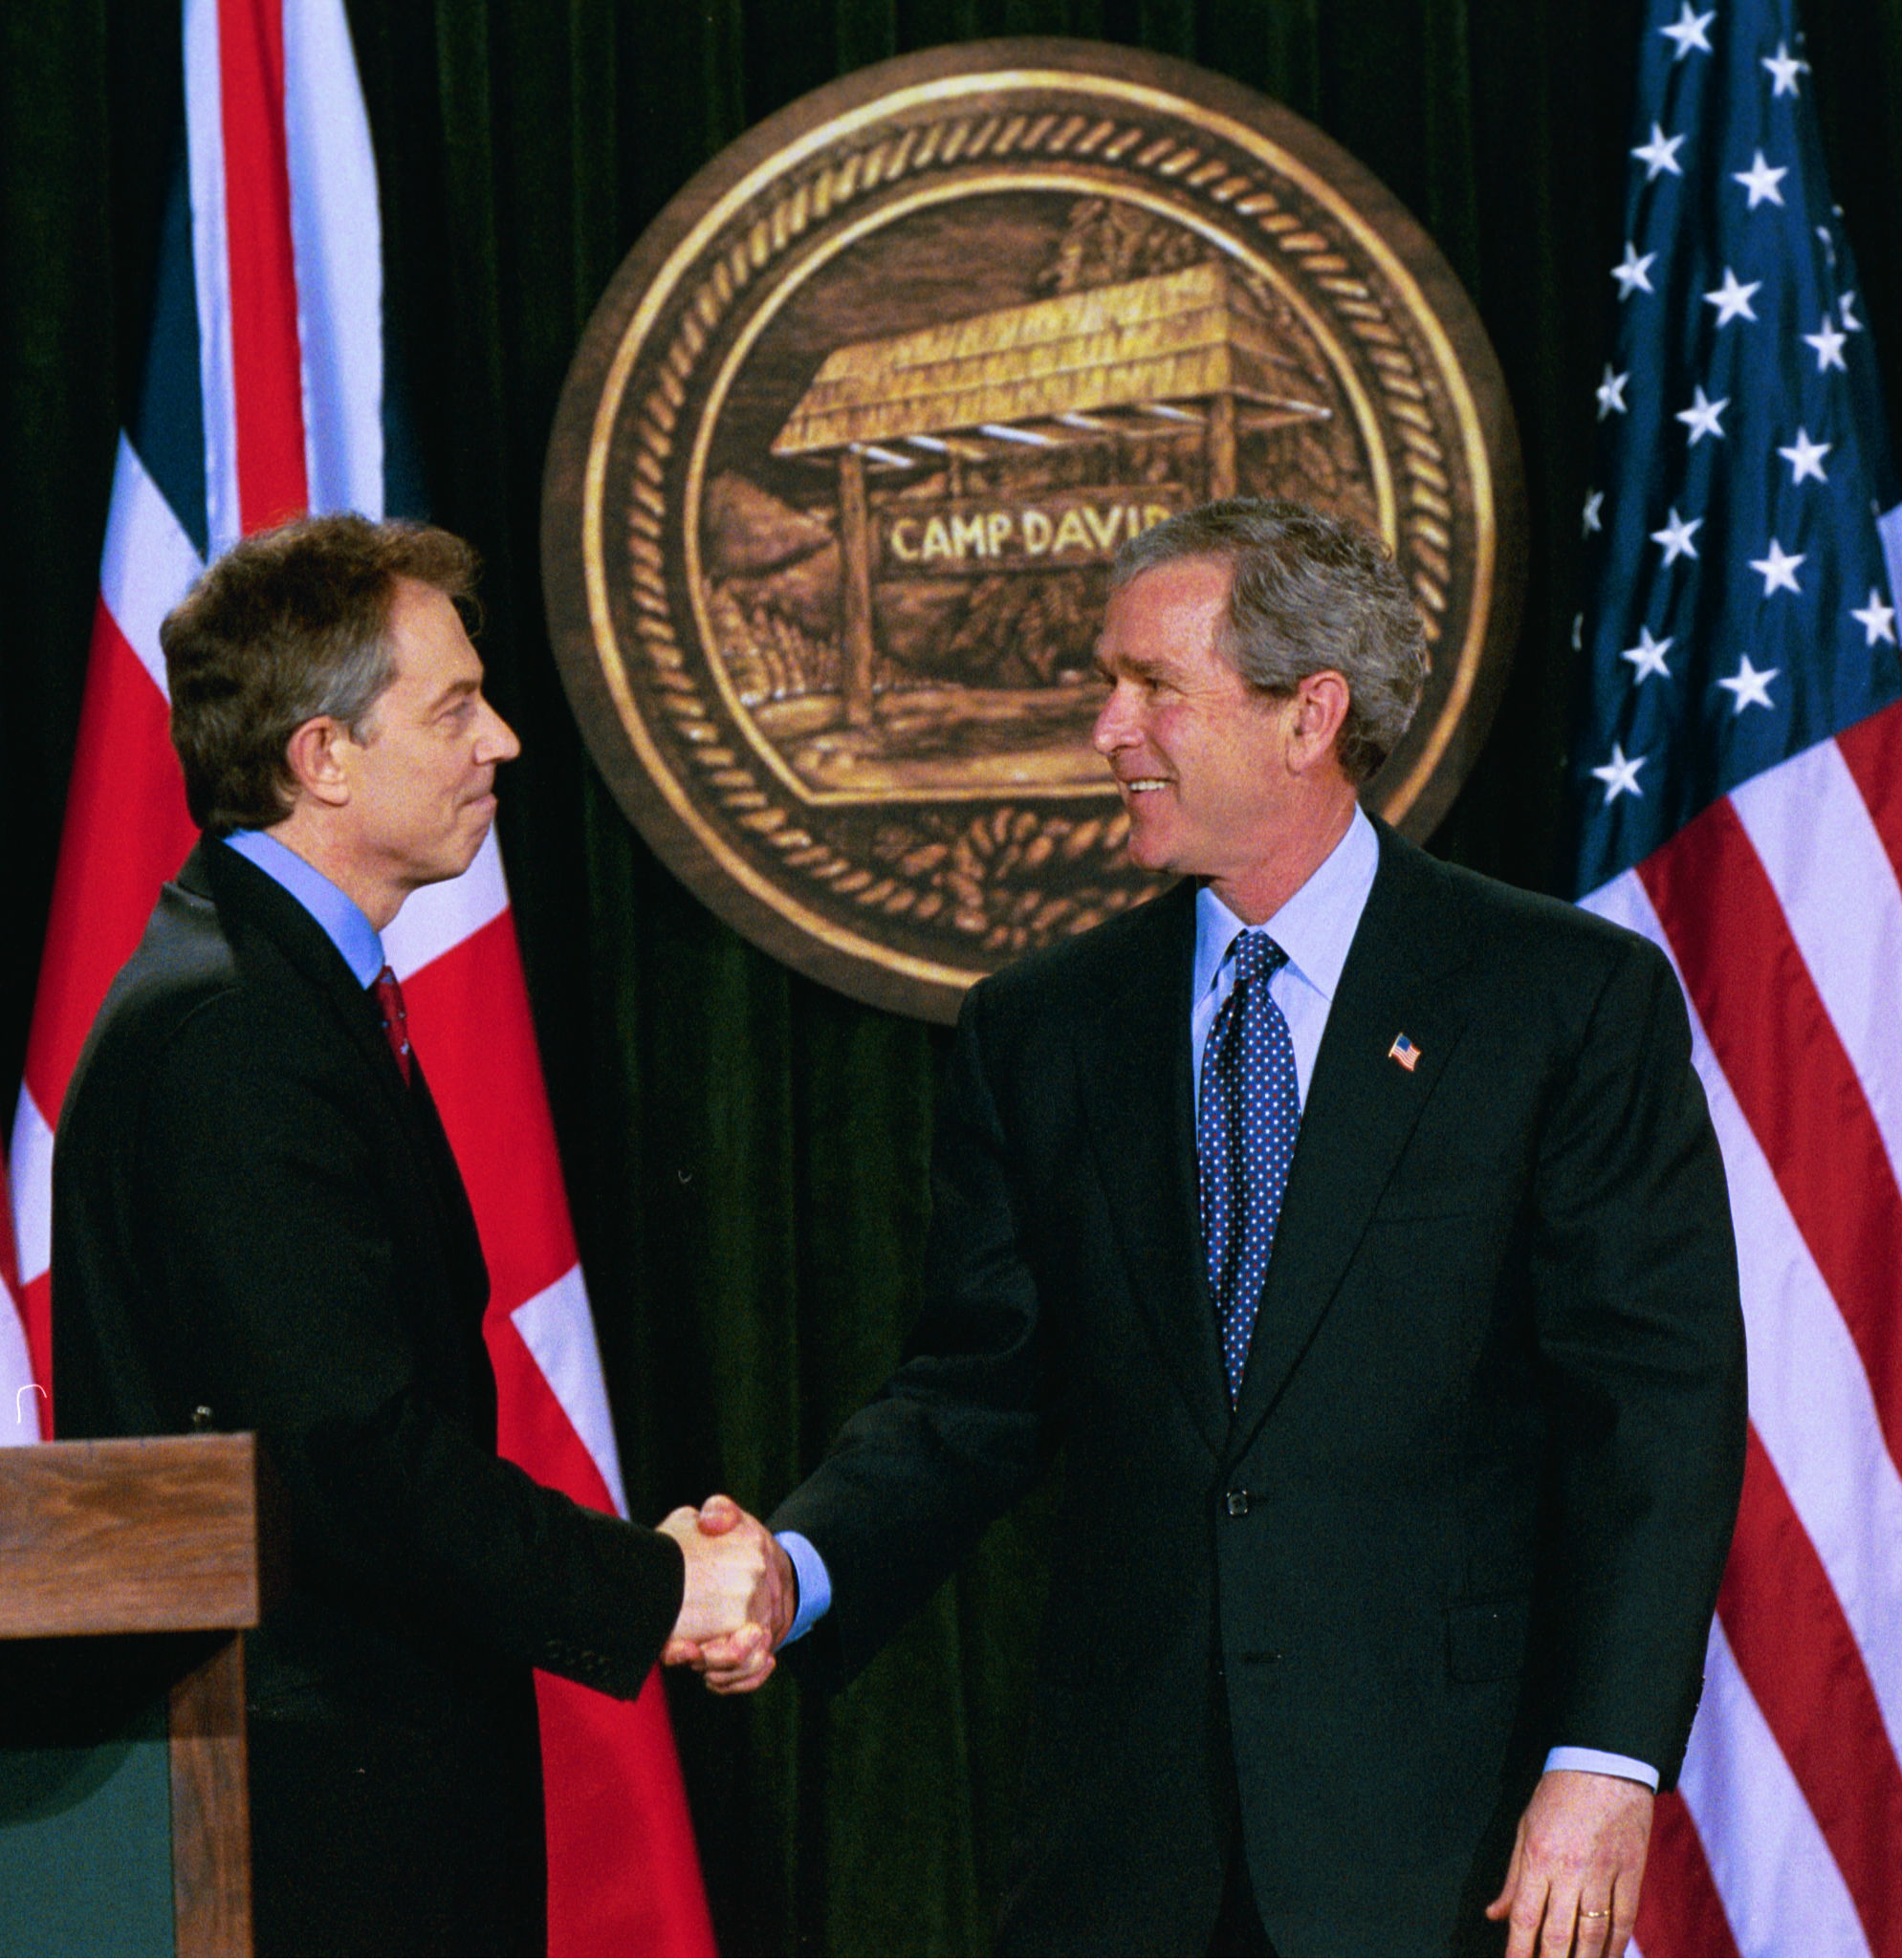 President George W. Bush and British Prime Minister Tony Blair shake hands after they conclude a joint news conference at the Camp David, March 27, 2003. (Paul Morse/White House)